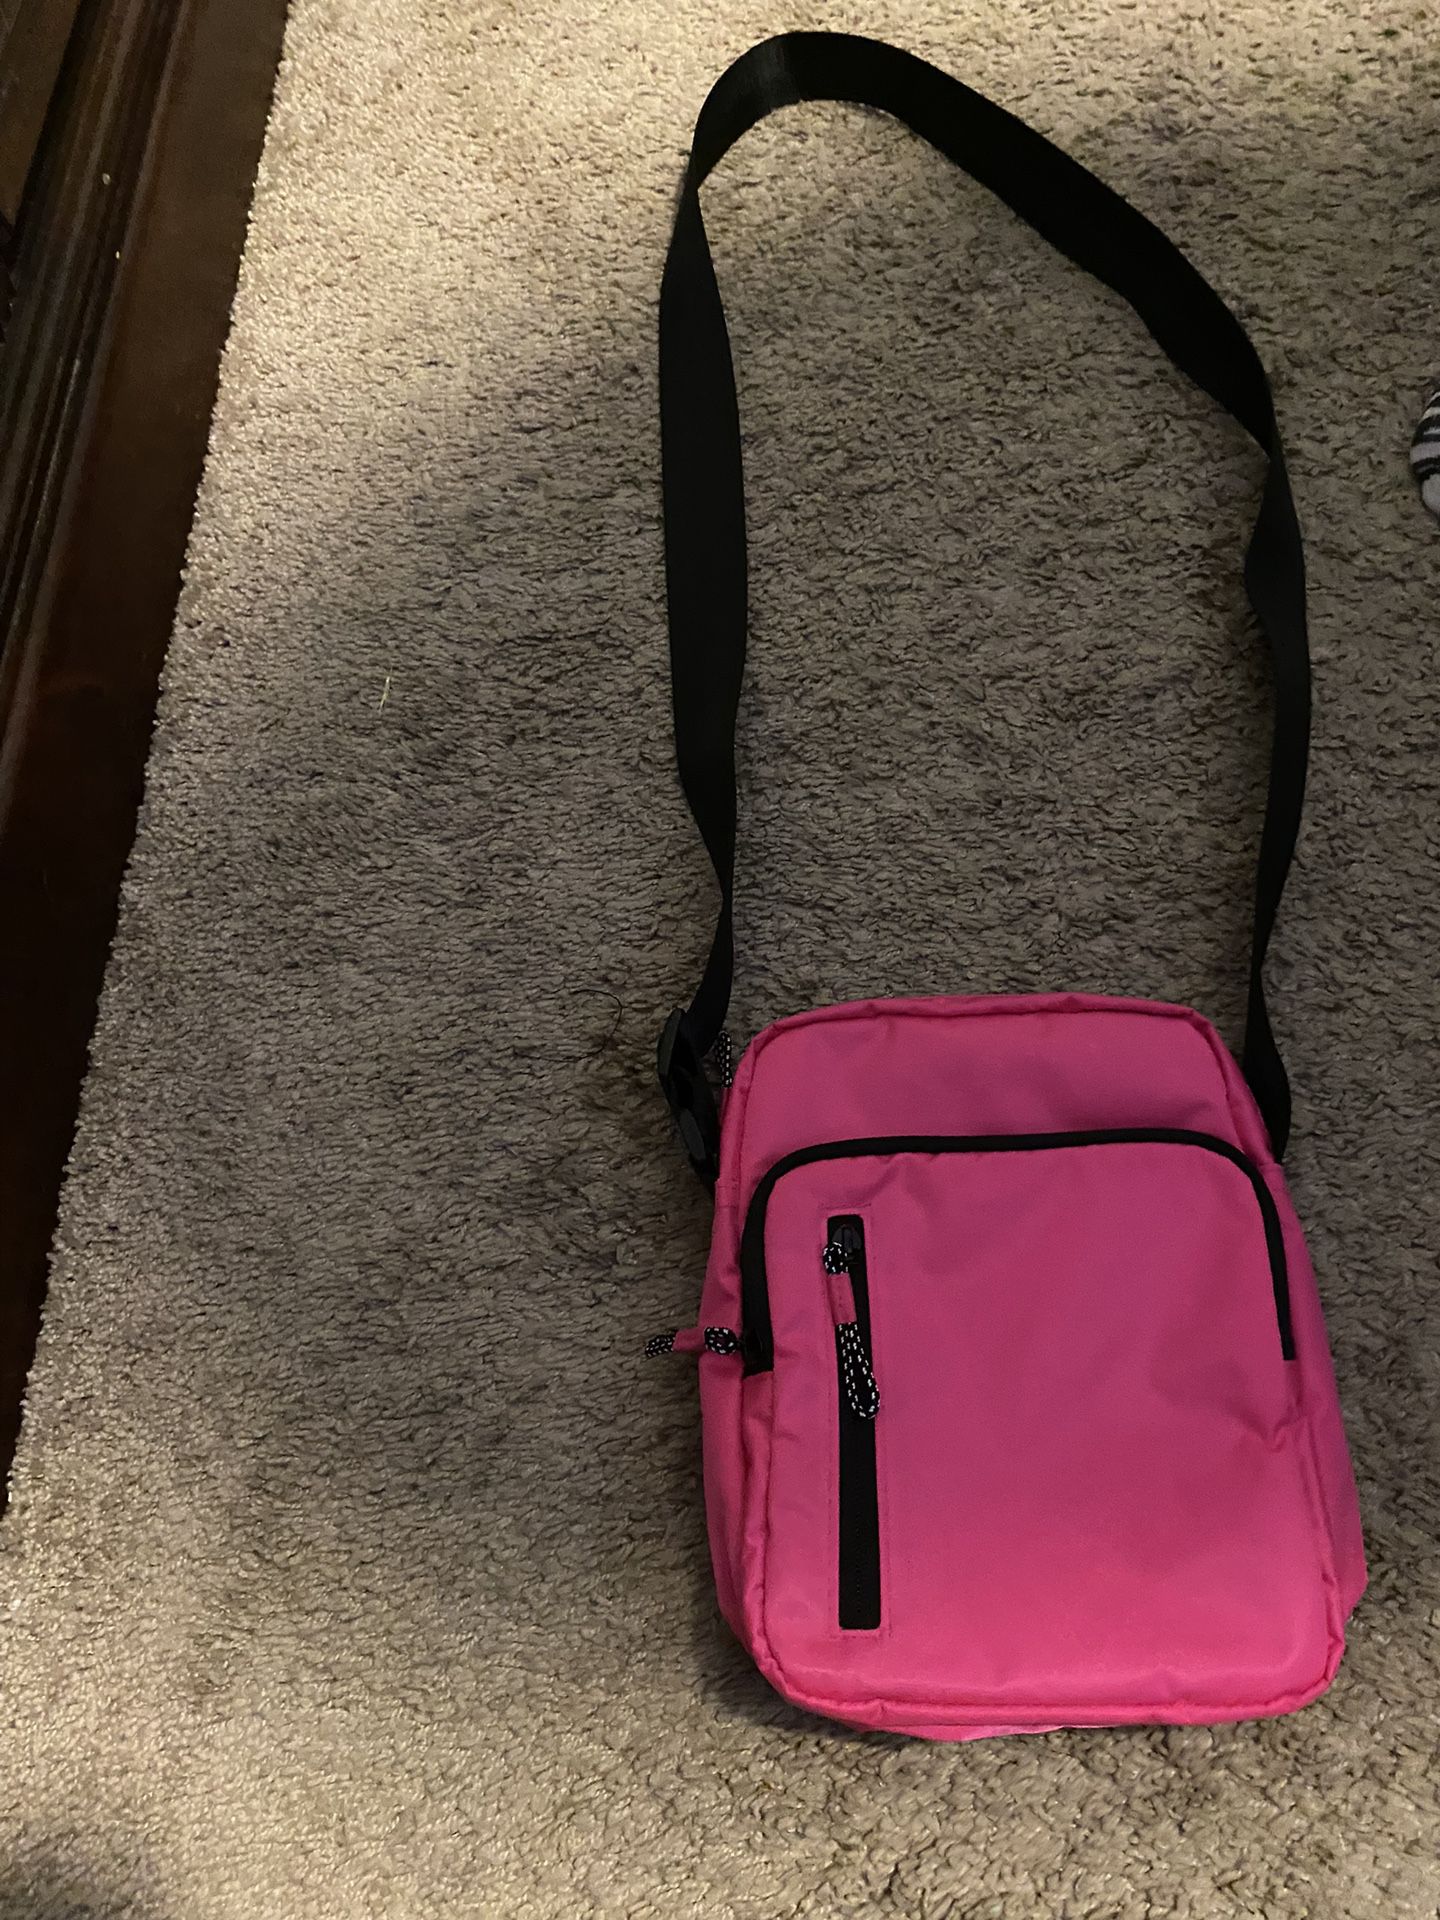 Pink Bag Goes Great For Small Items It’s Light And Easy To Carry